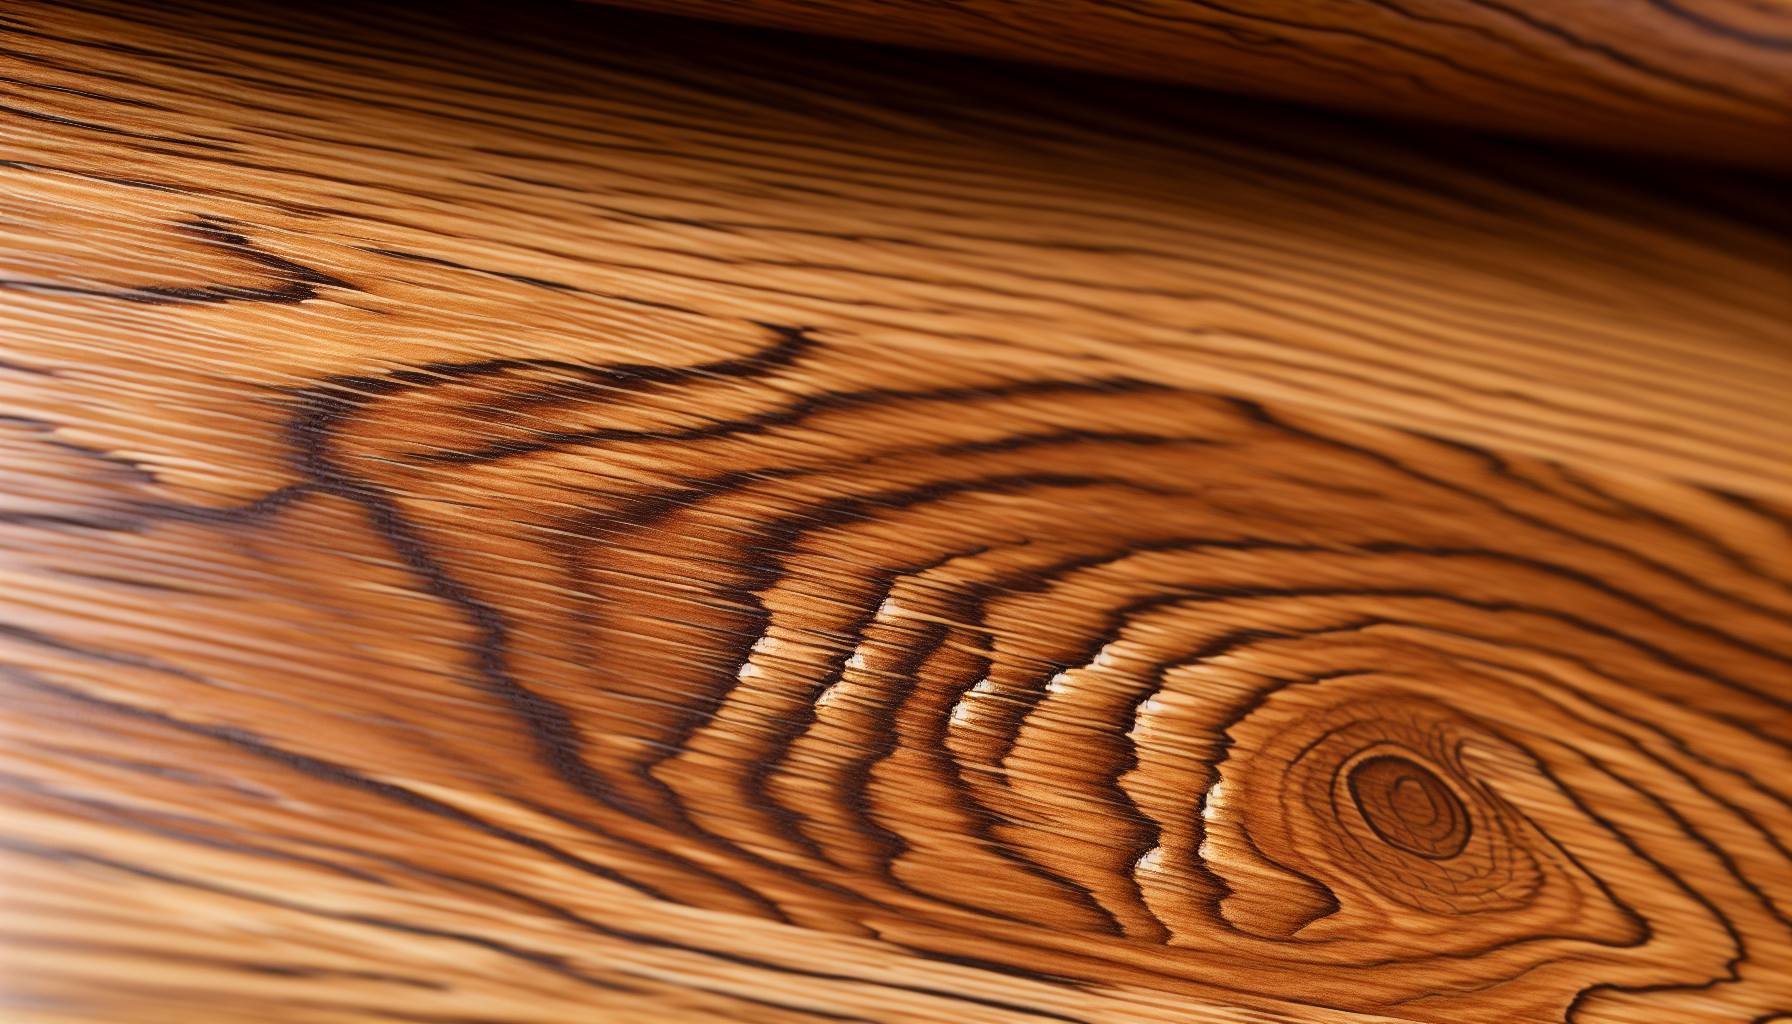 A close-up of high-quality engineered wood flooring, highlighting its durability and longevity